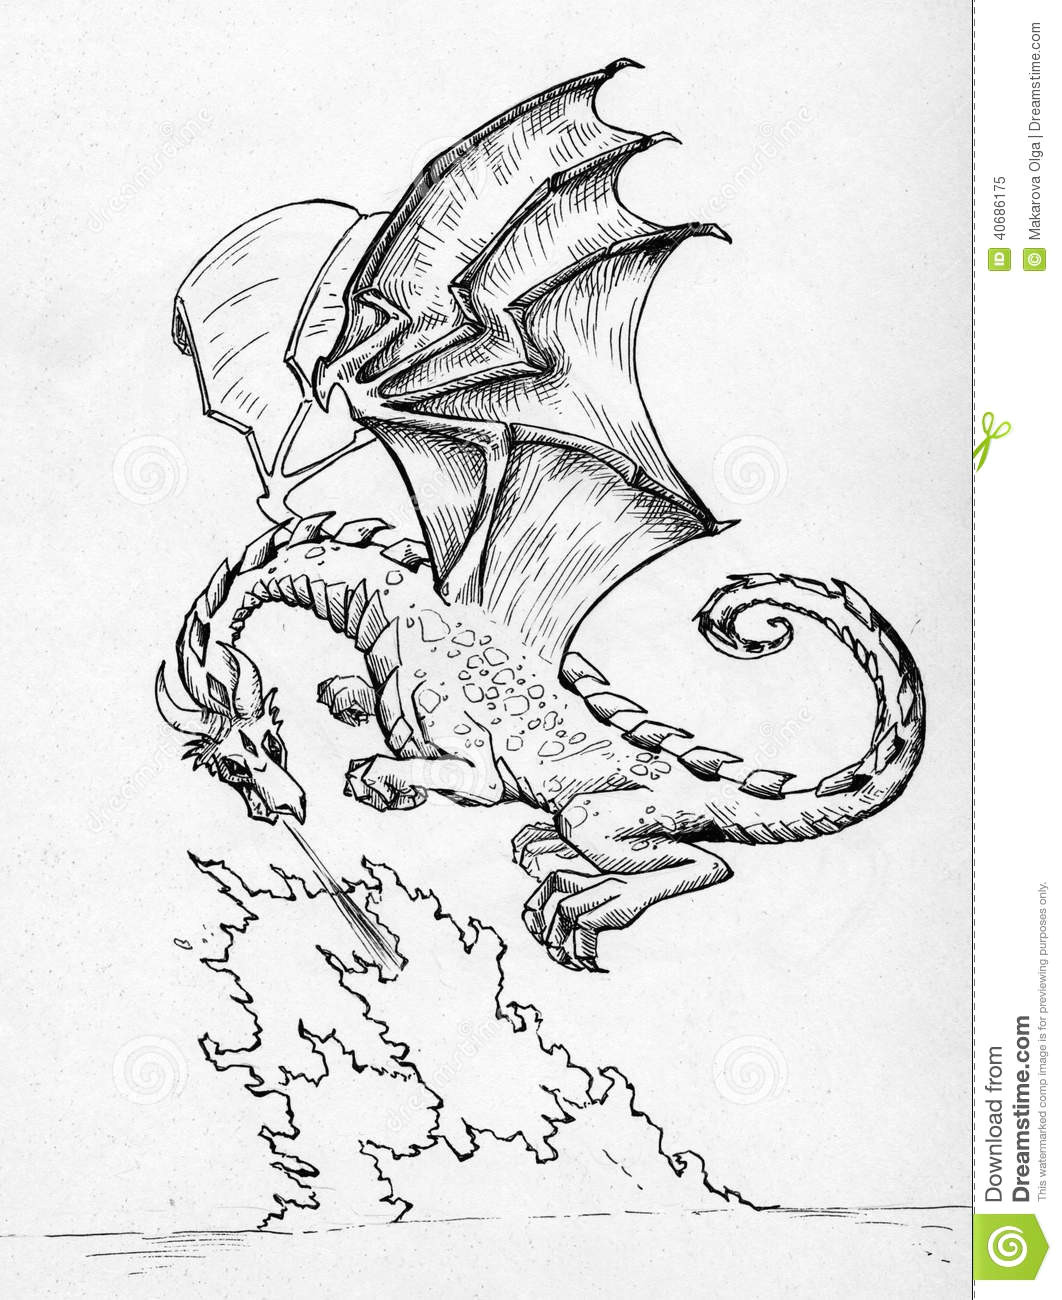 Drawings Of Dragons Breathing Fire Dragon Breathing Fire Stock Illustration Illustration Of